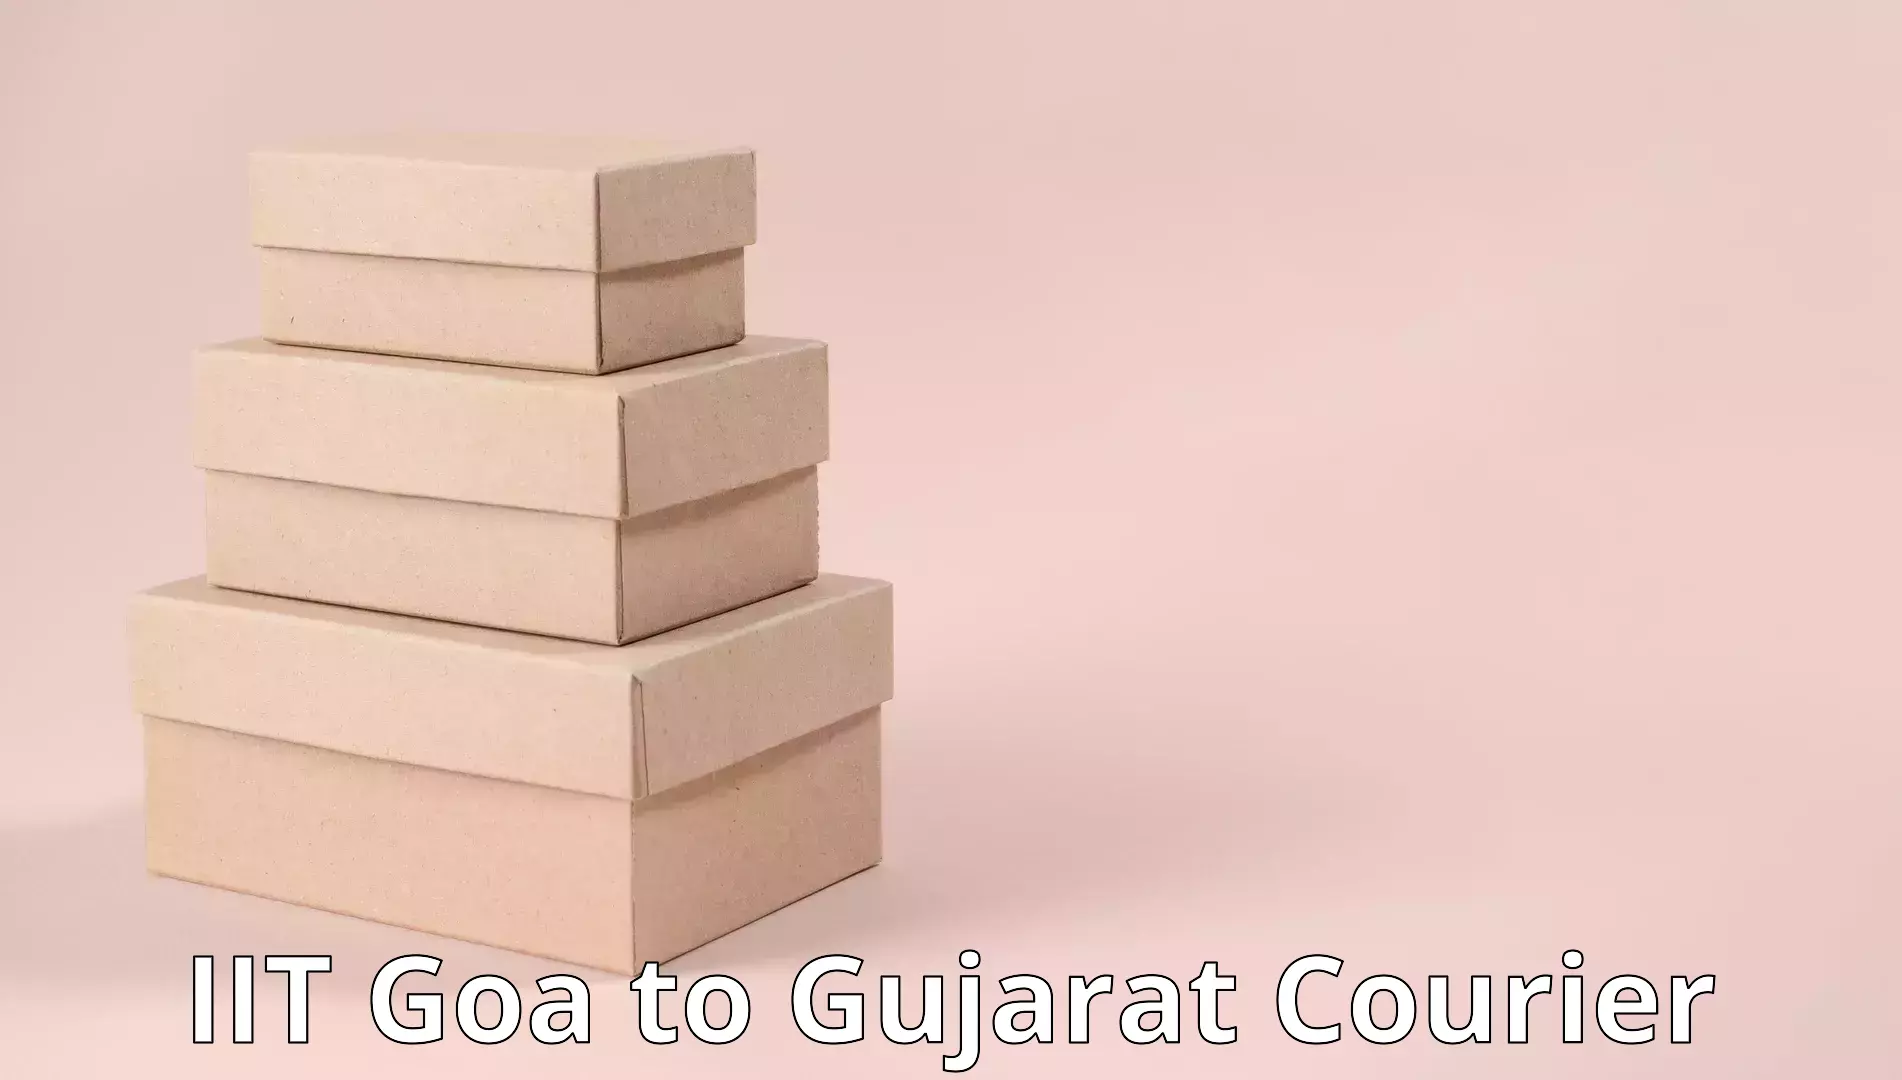 Professional movers and packers IIT Goa to Gujarat